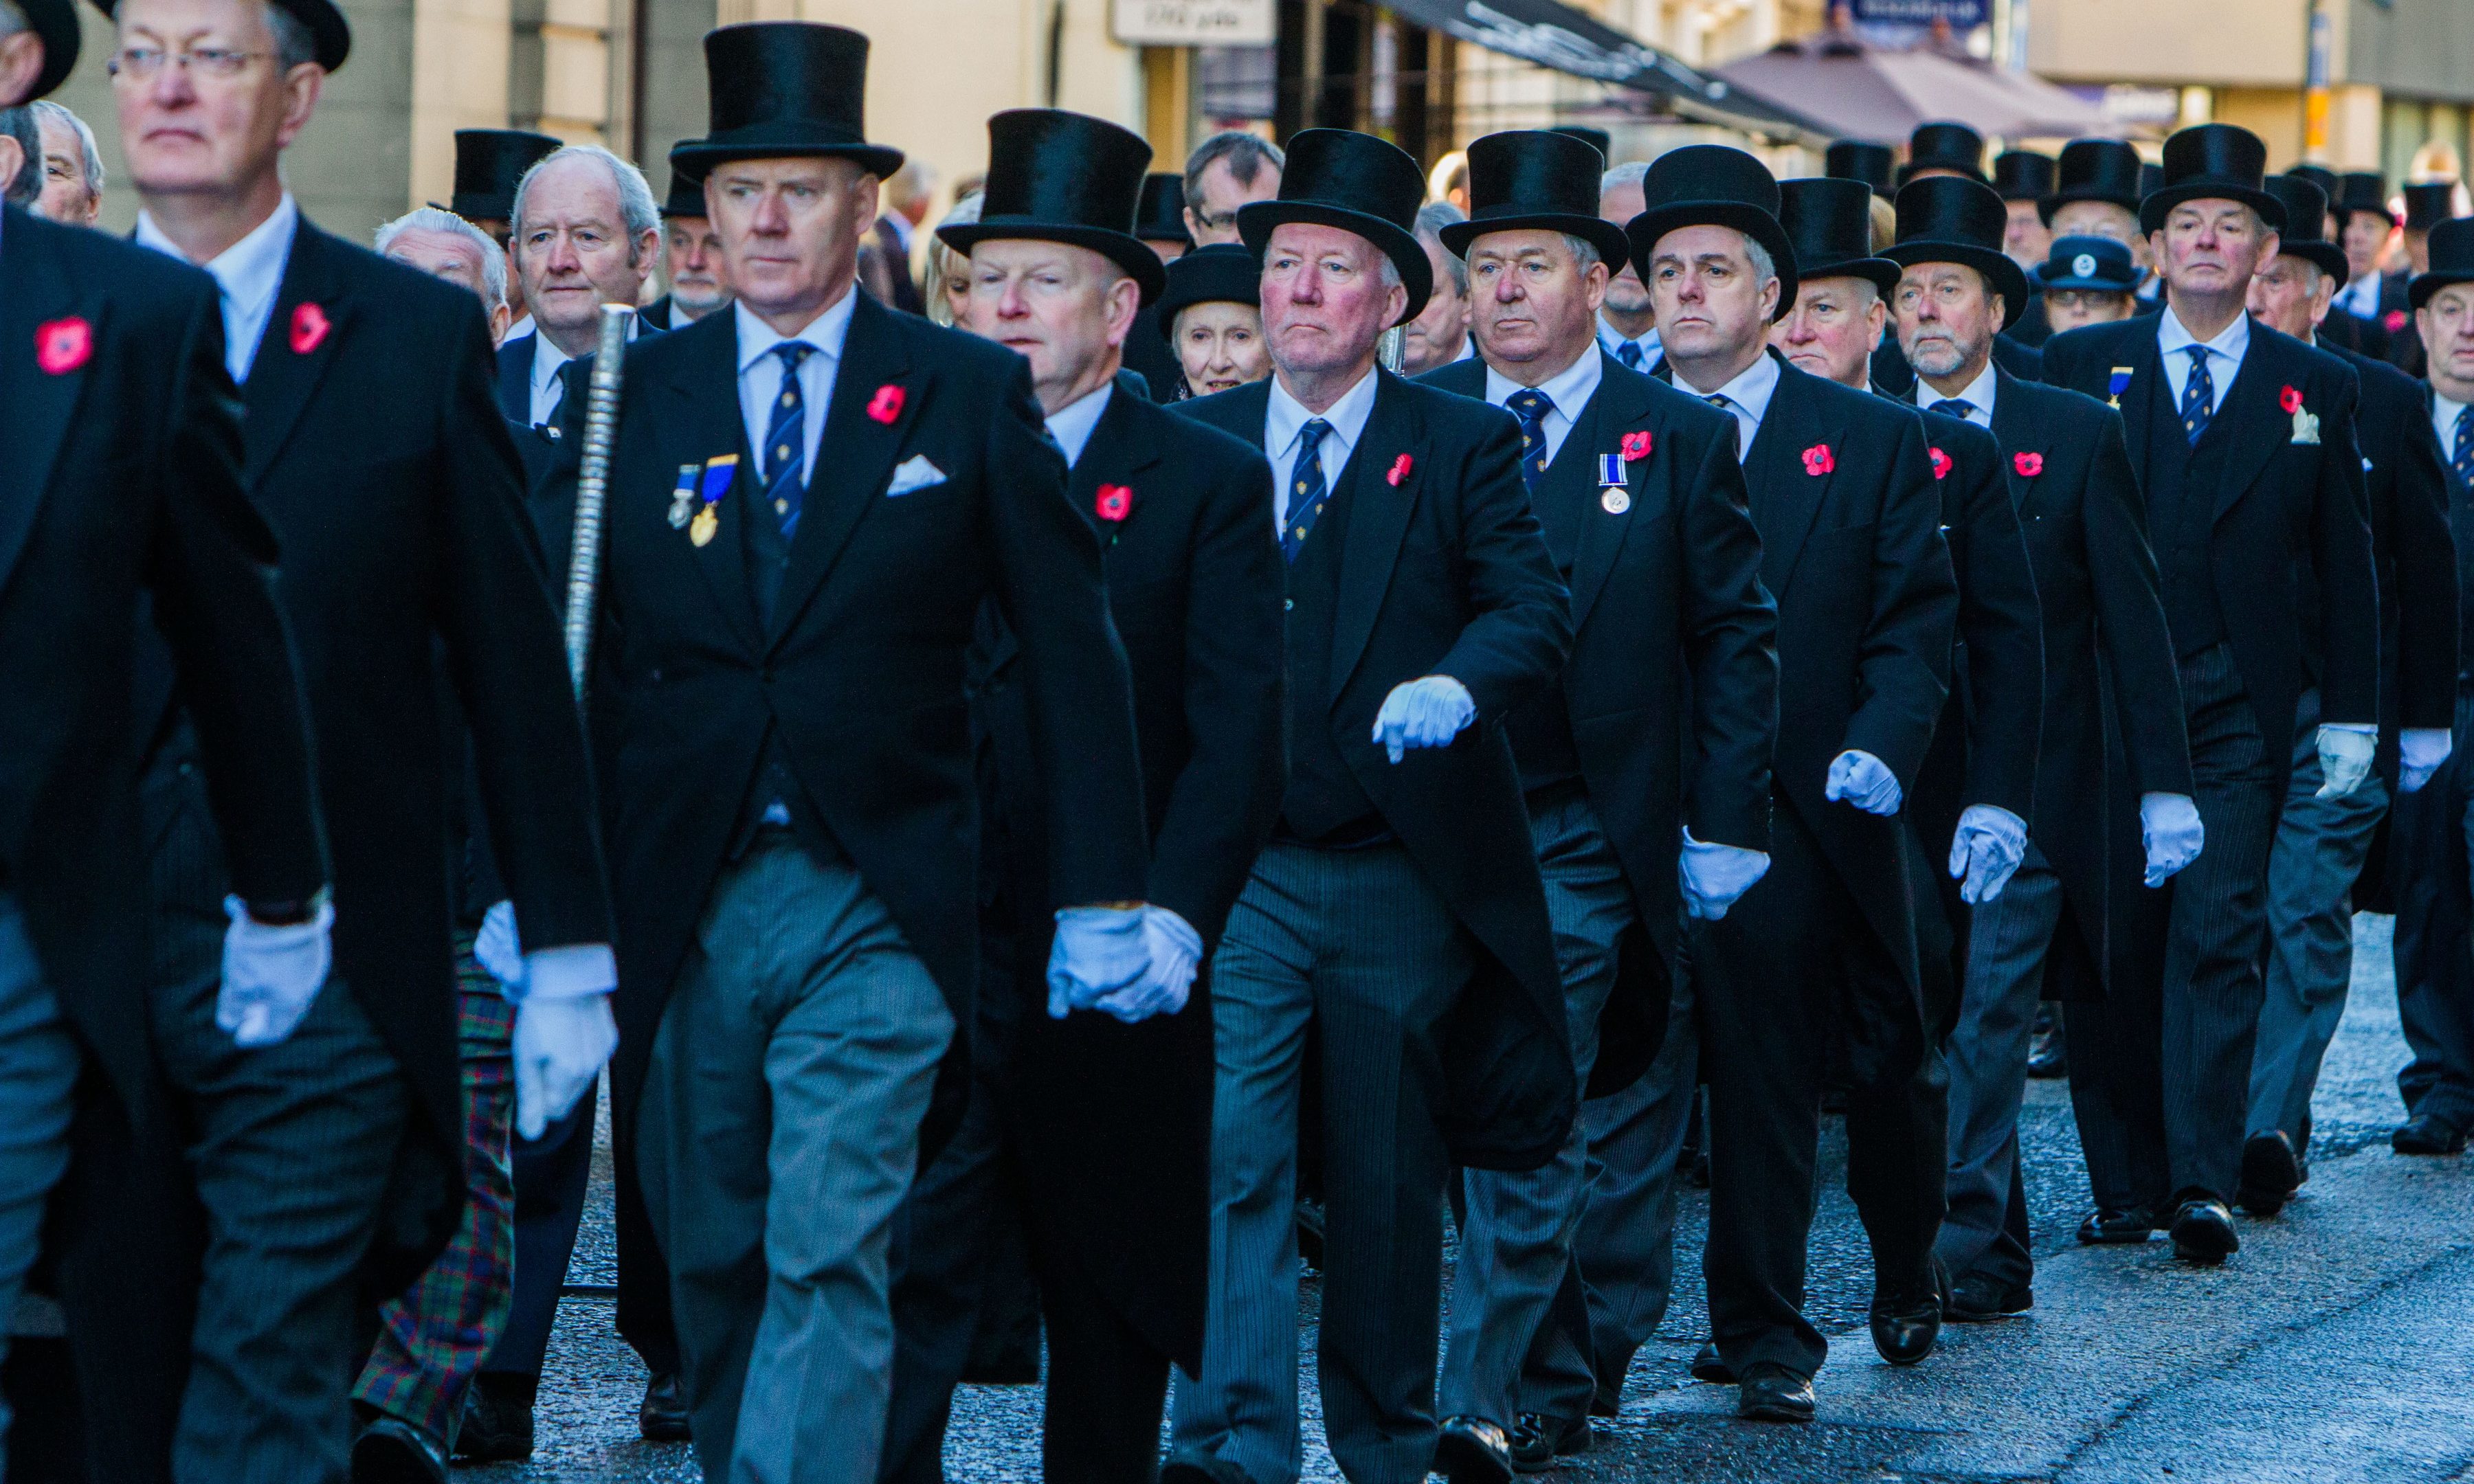 The Society of High Constables of the City of Perth parading in 2015.